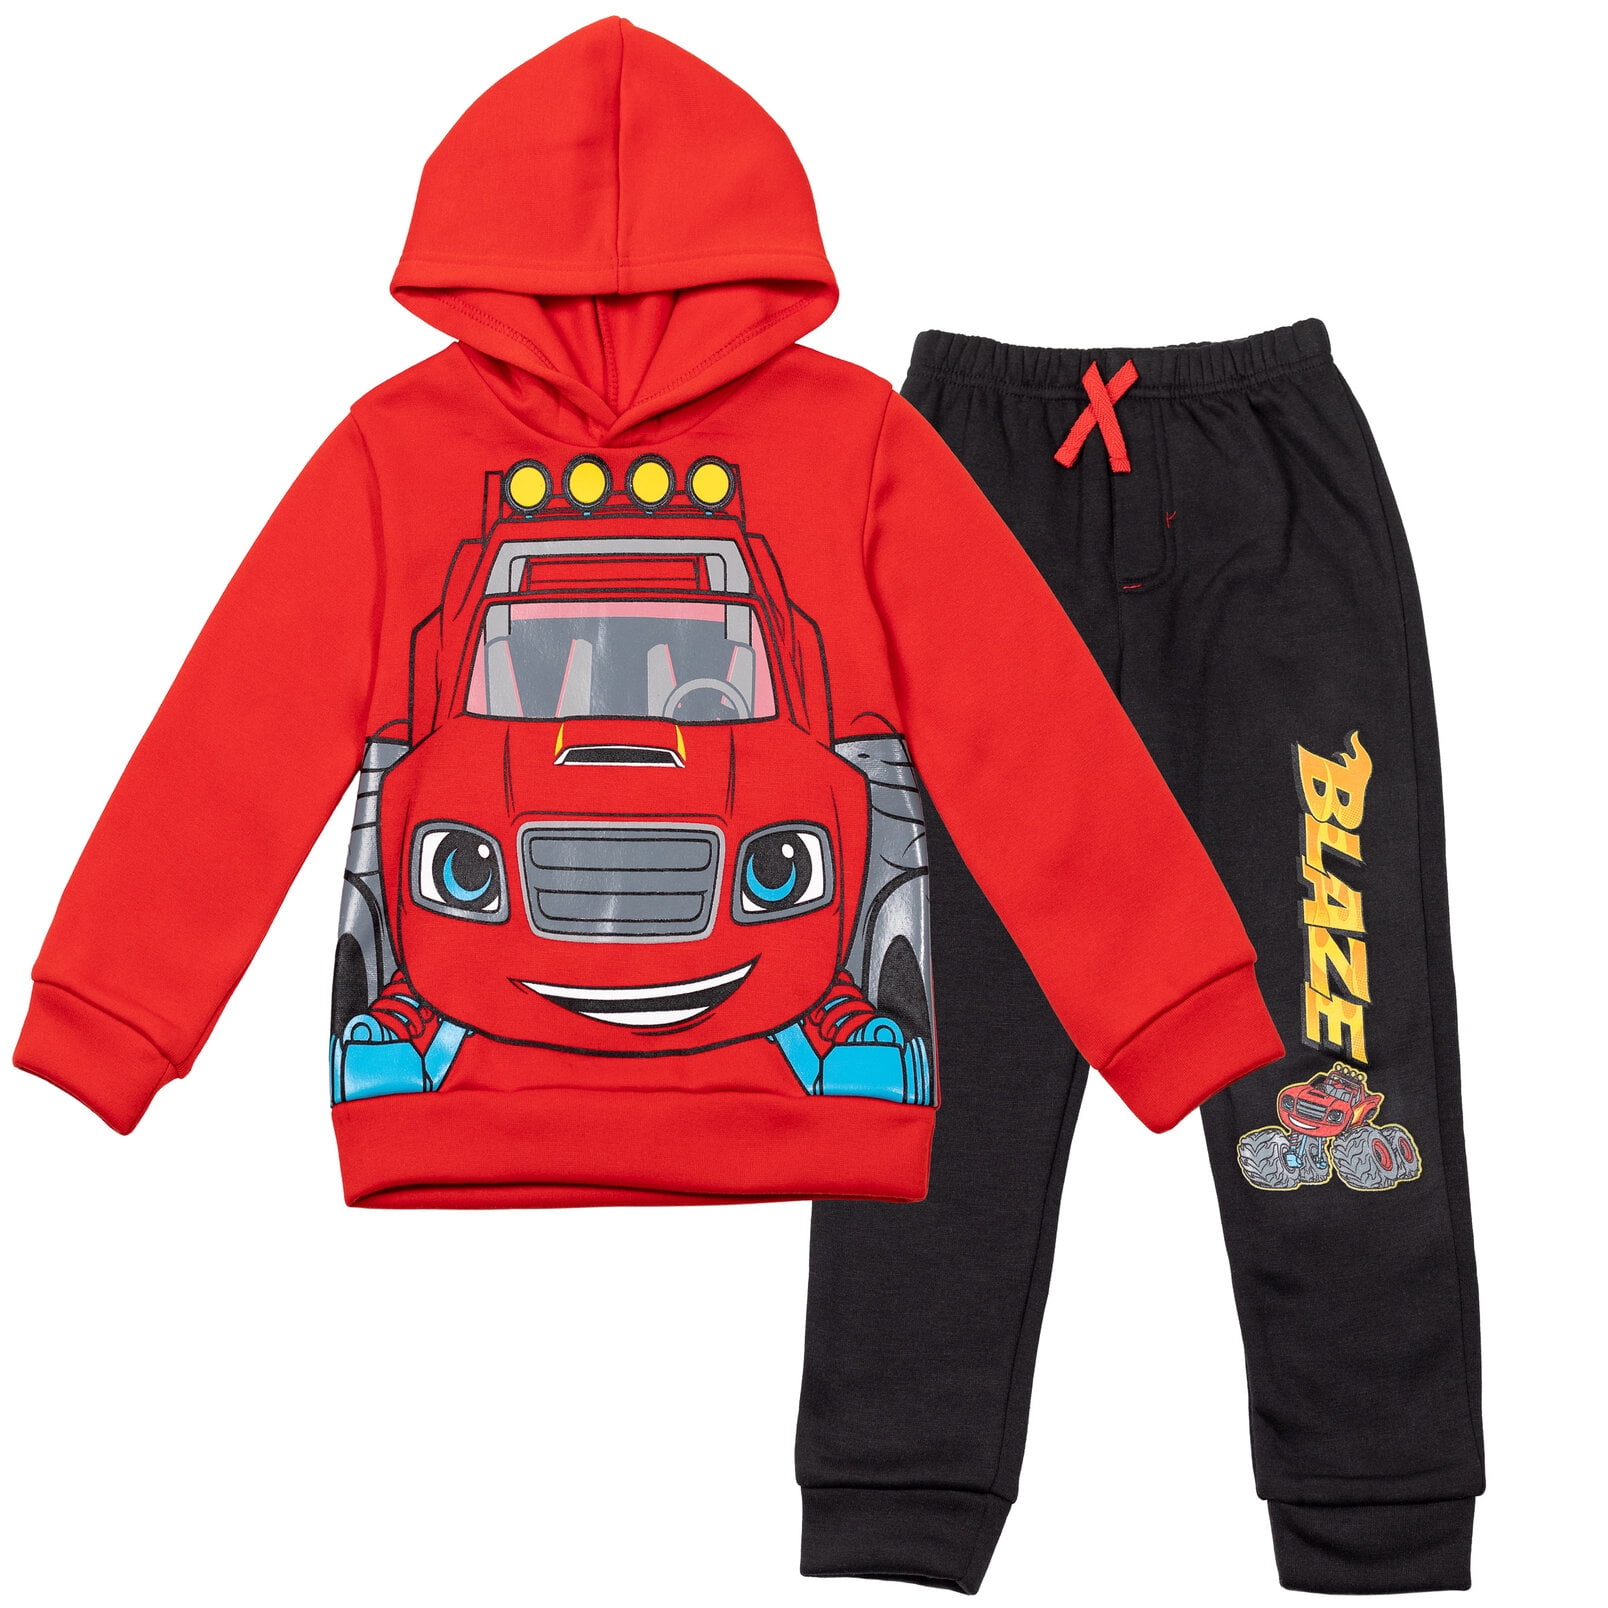 Jumping Beans Active Toddler Boys Blaze Outfit Red Shirt & Shorts